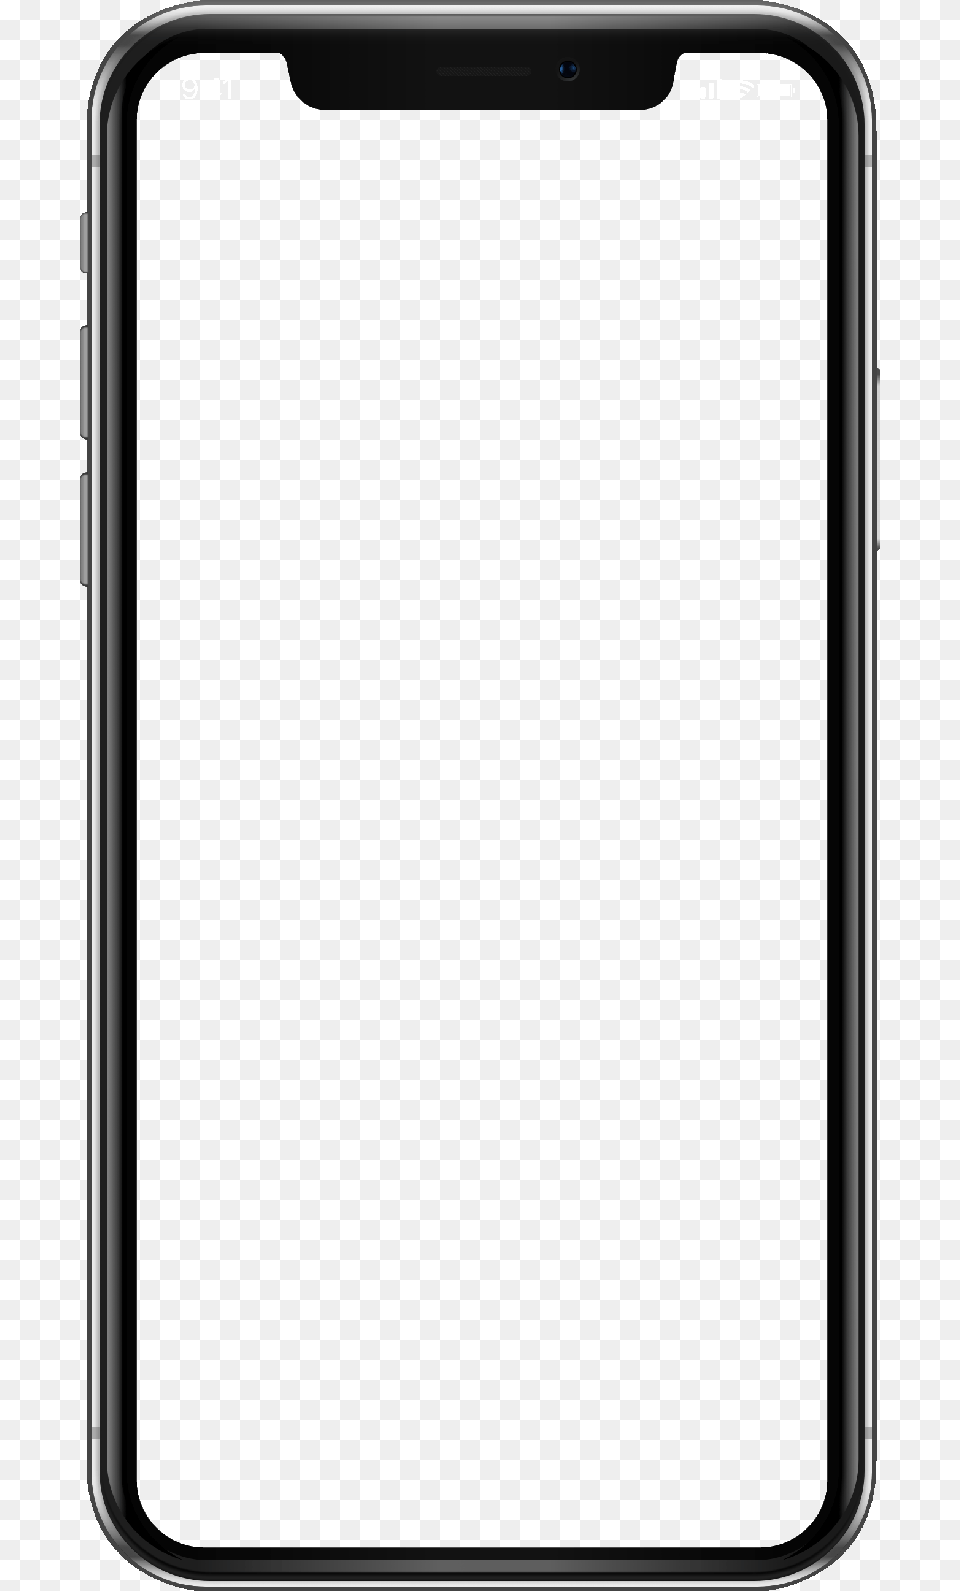 Get On Romeo Now Iphone X Frame, Electronics, Mobile Phone, Phone, White Board Free Png Download